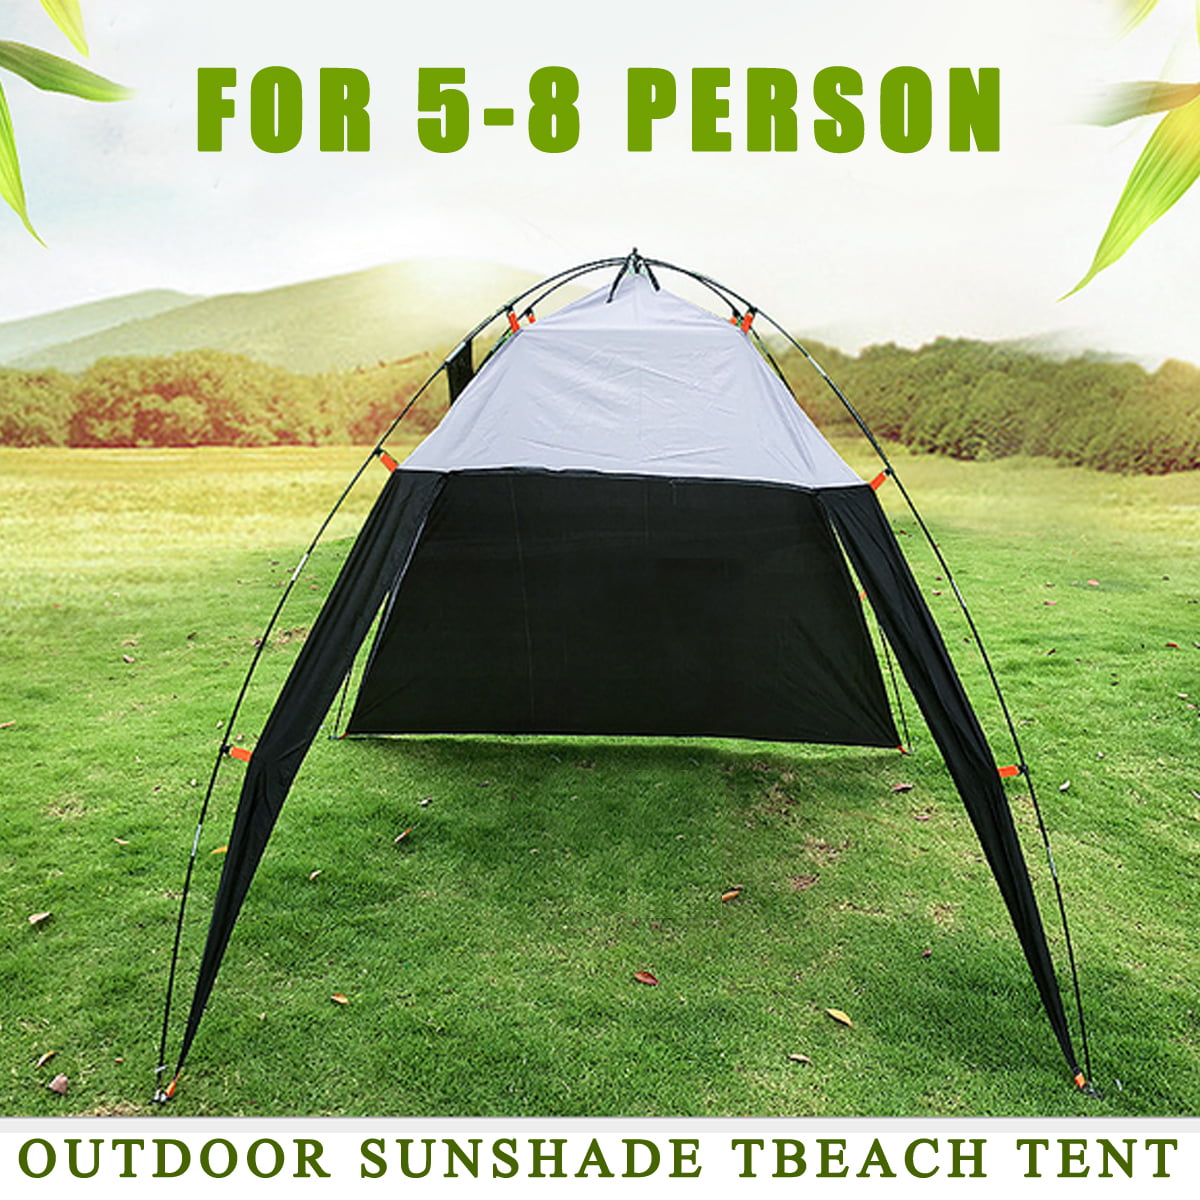 Portable Beach Canopy Sun Shade Triangle Patchwork Tent Shelter Camping Fishing